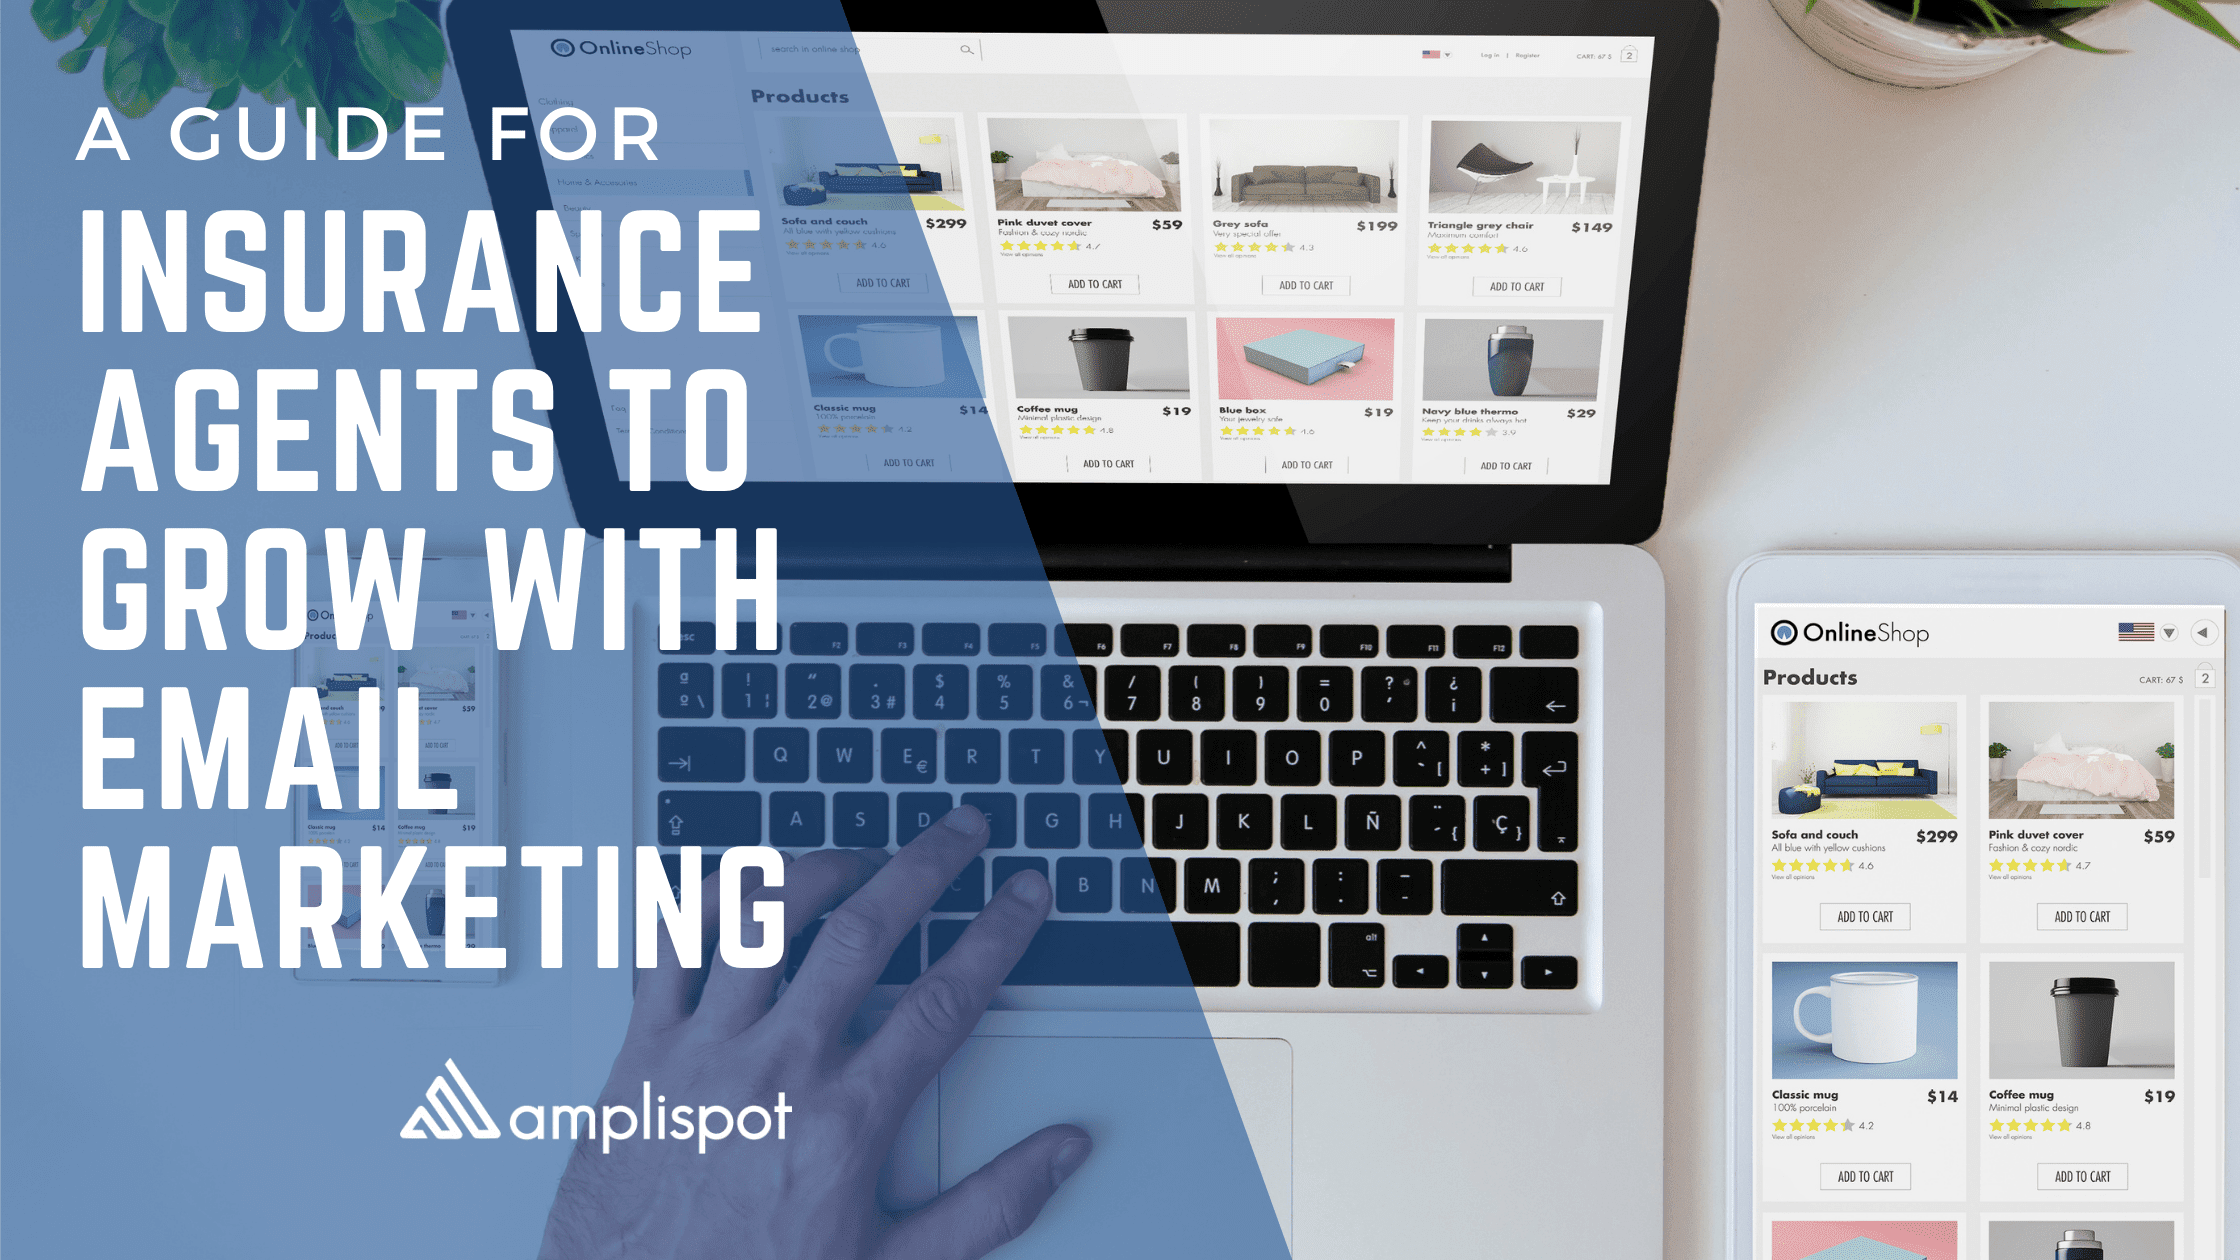 A Guide for Insurance Agents to Grow with Email Marketing